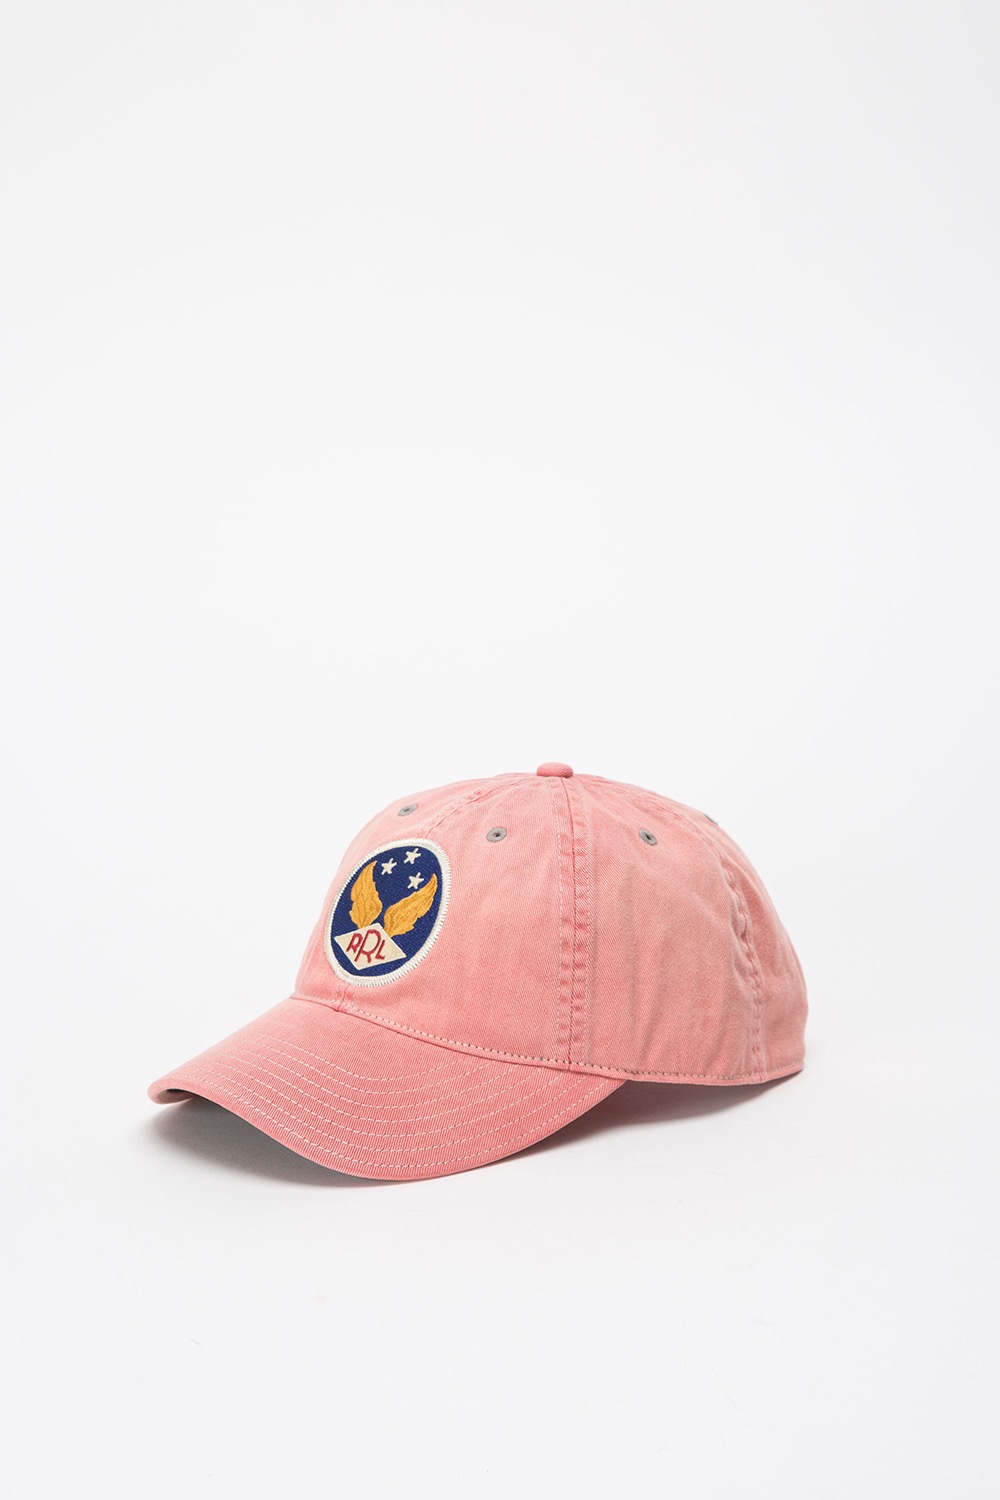 WINGED LOGO BALL CAP RED